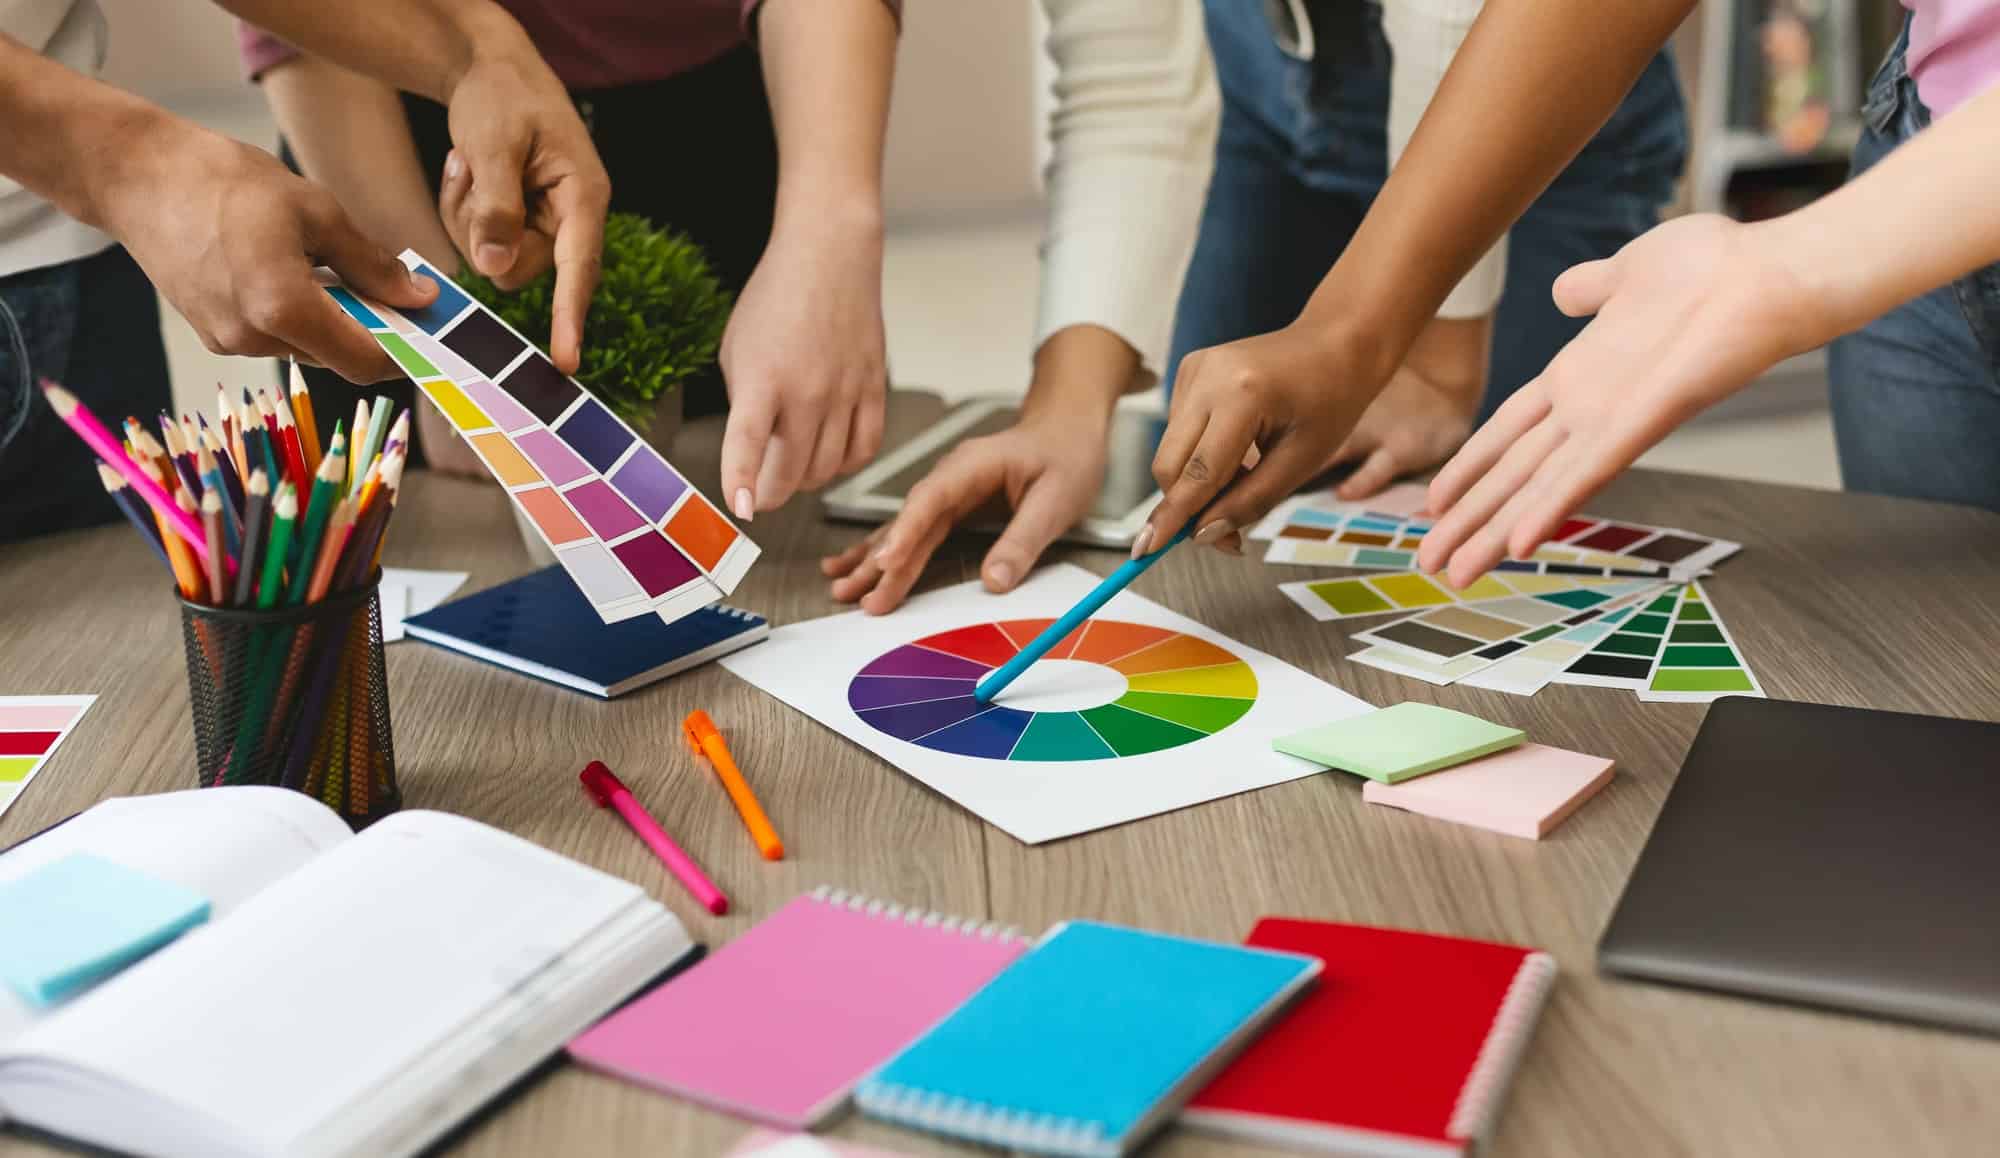 Group of young graphic designers choosing color swatch samples